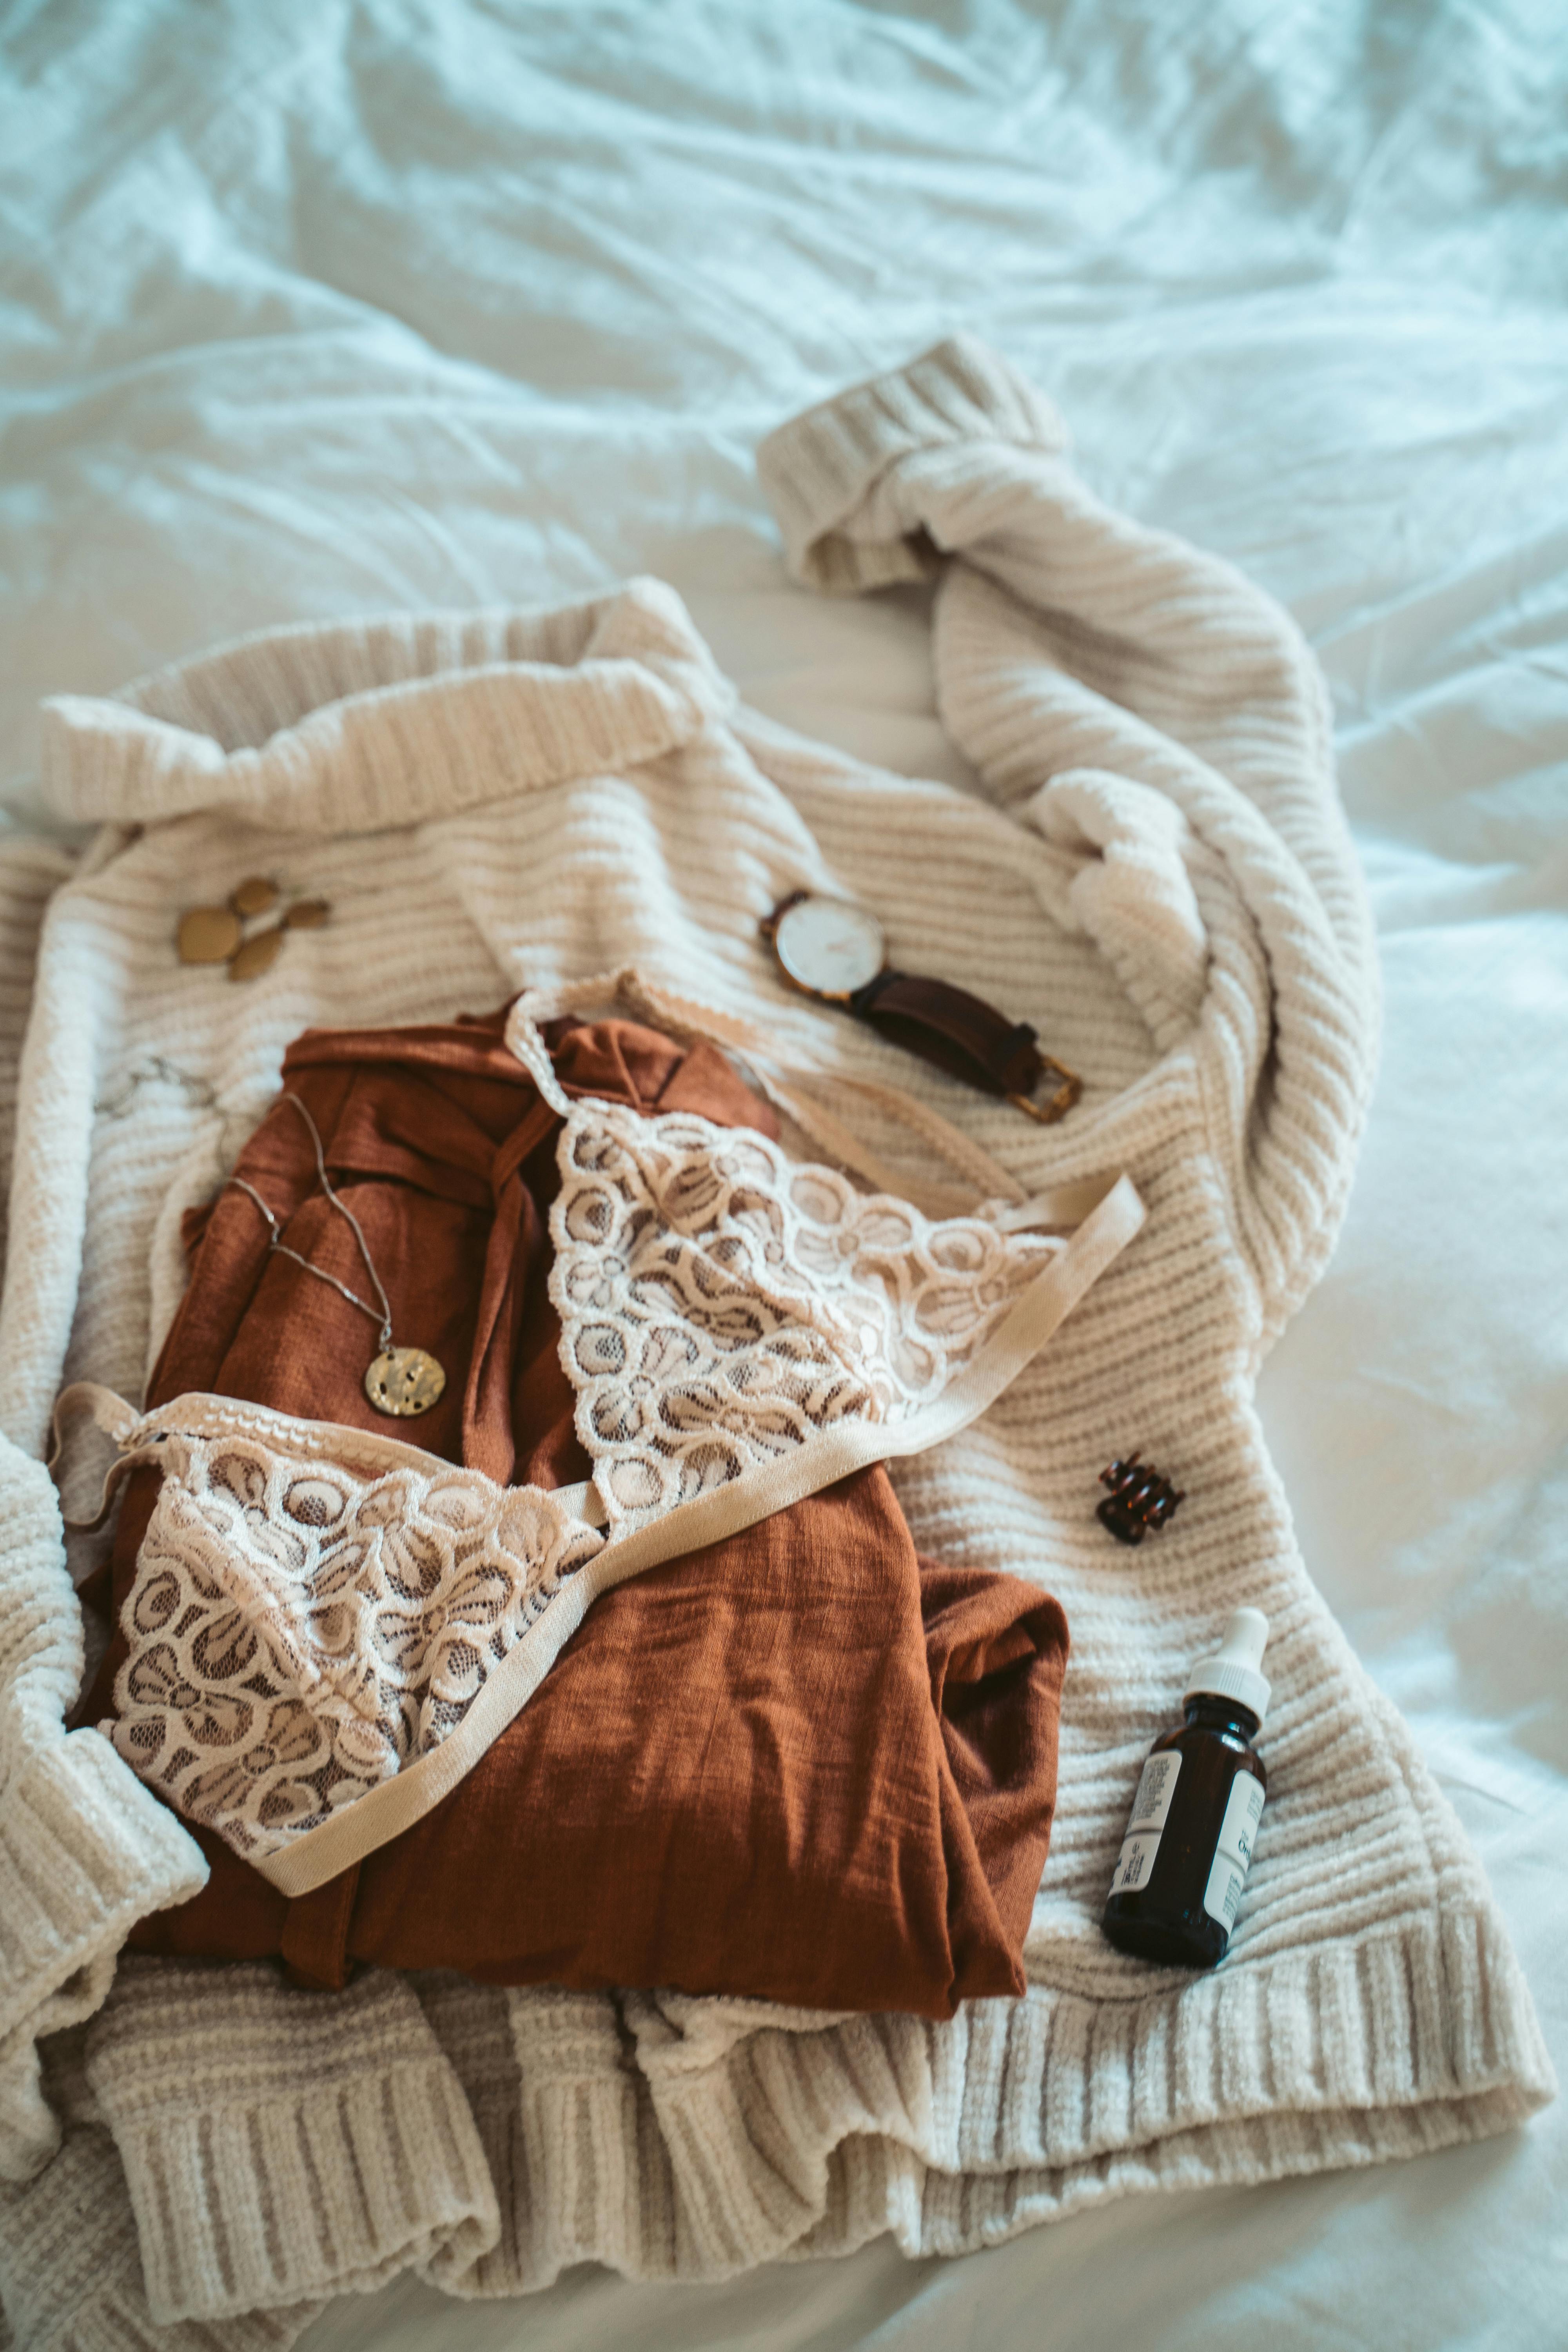 A bra, top, pants, and accessories laid out on a surface | Source: Pexels